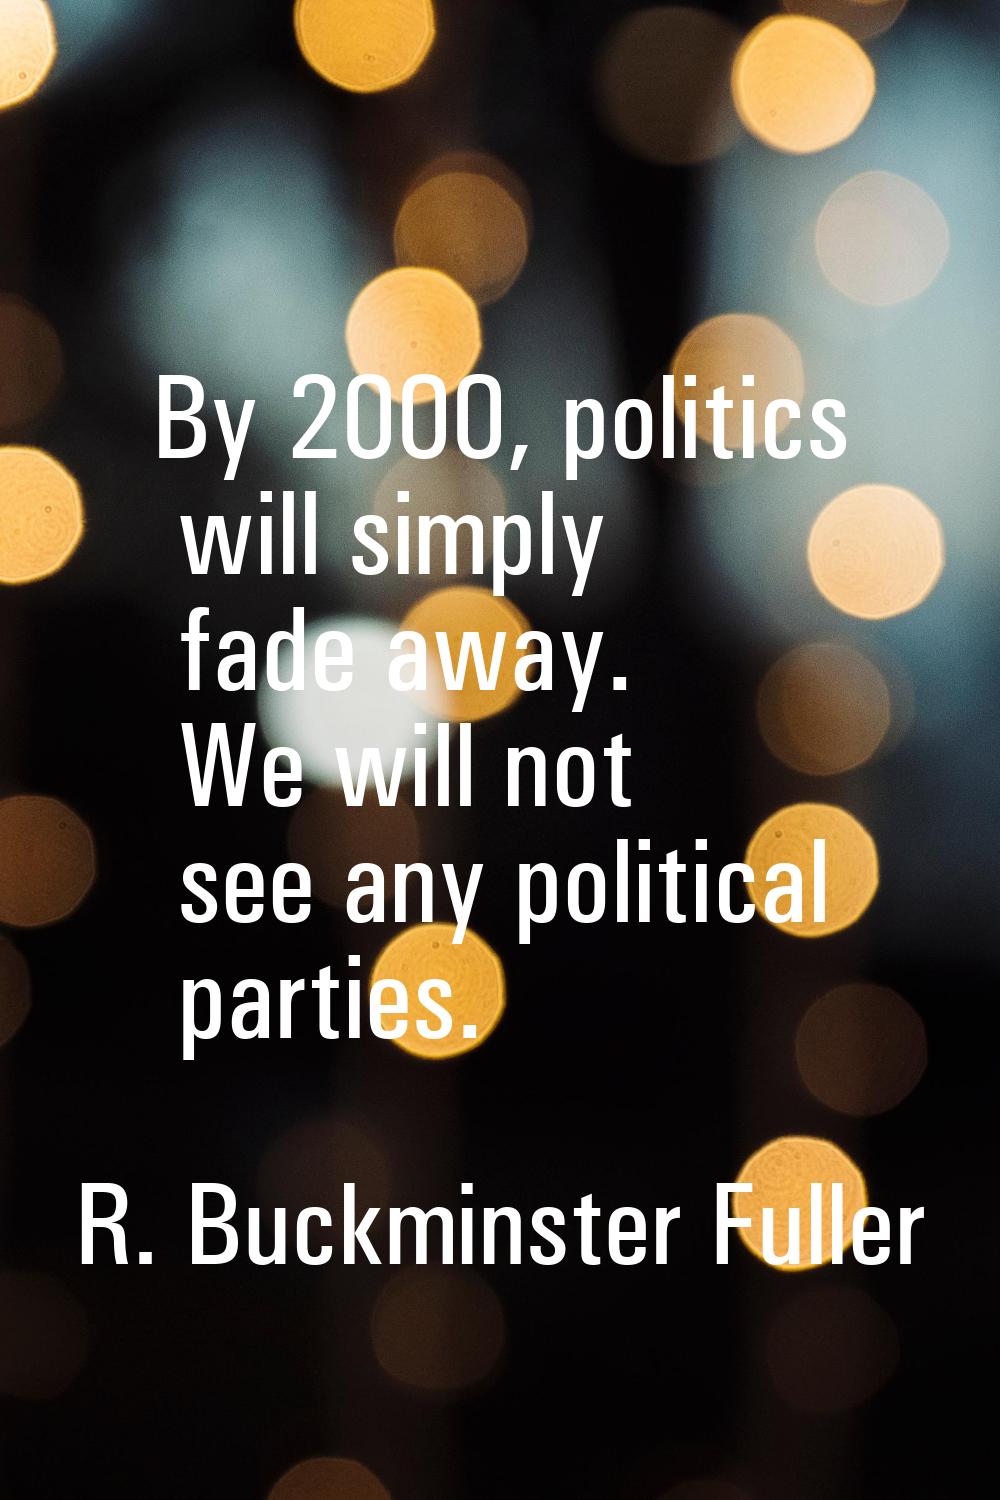 By 2000, politics will simply fade away. We will not see any political parties.